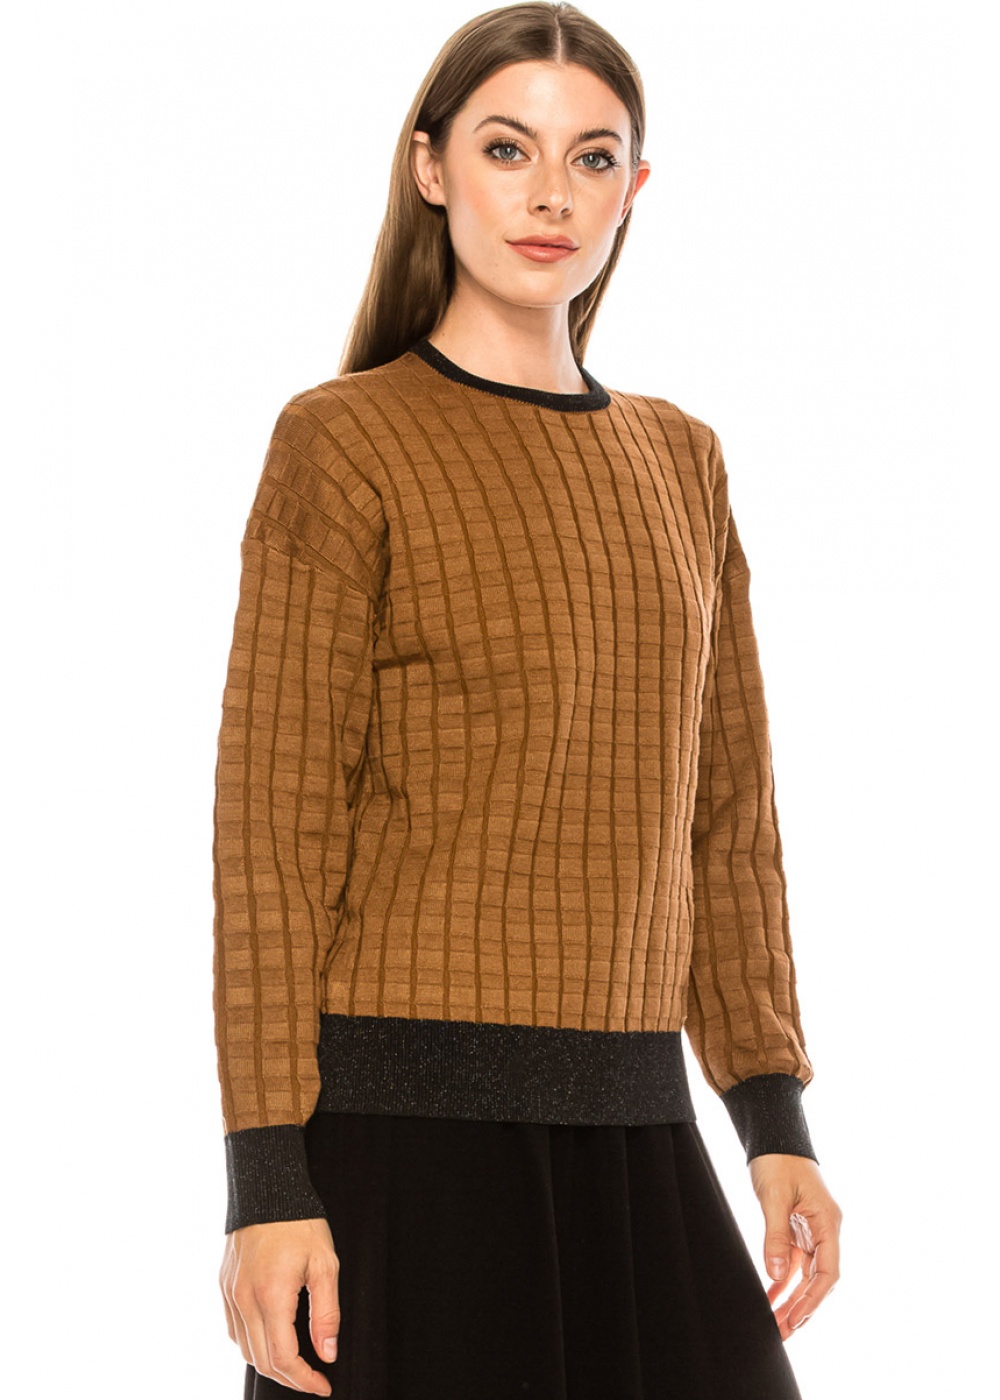 Checkered texture sweater in camel